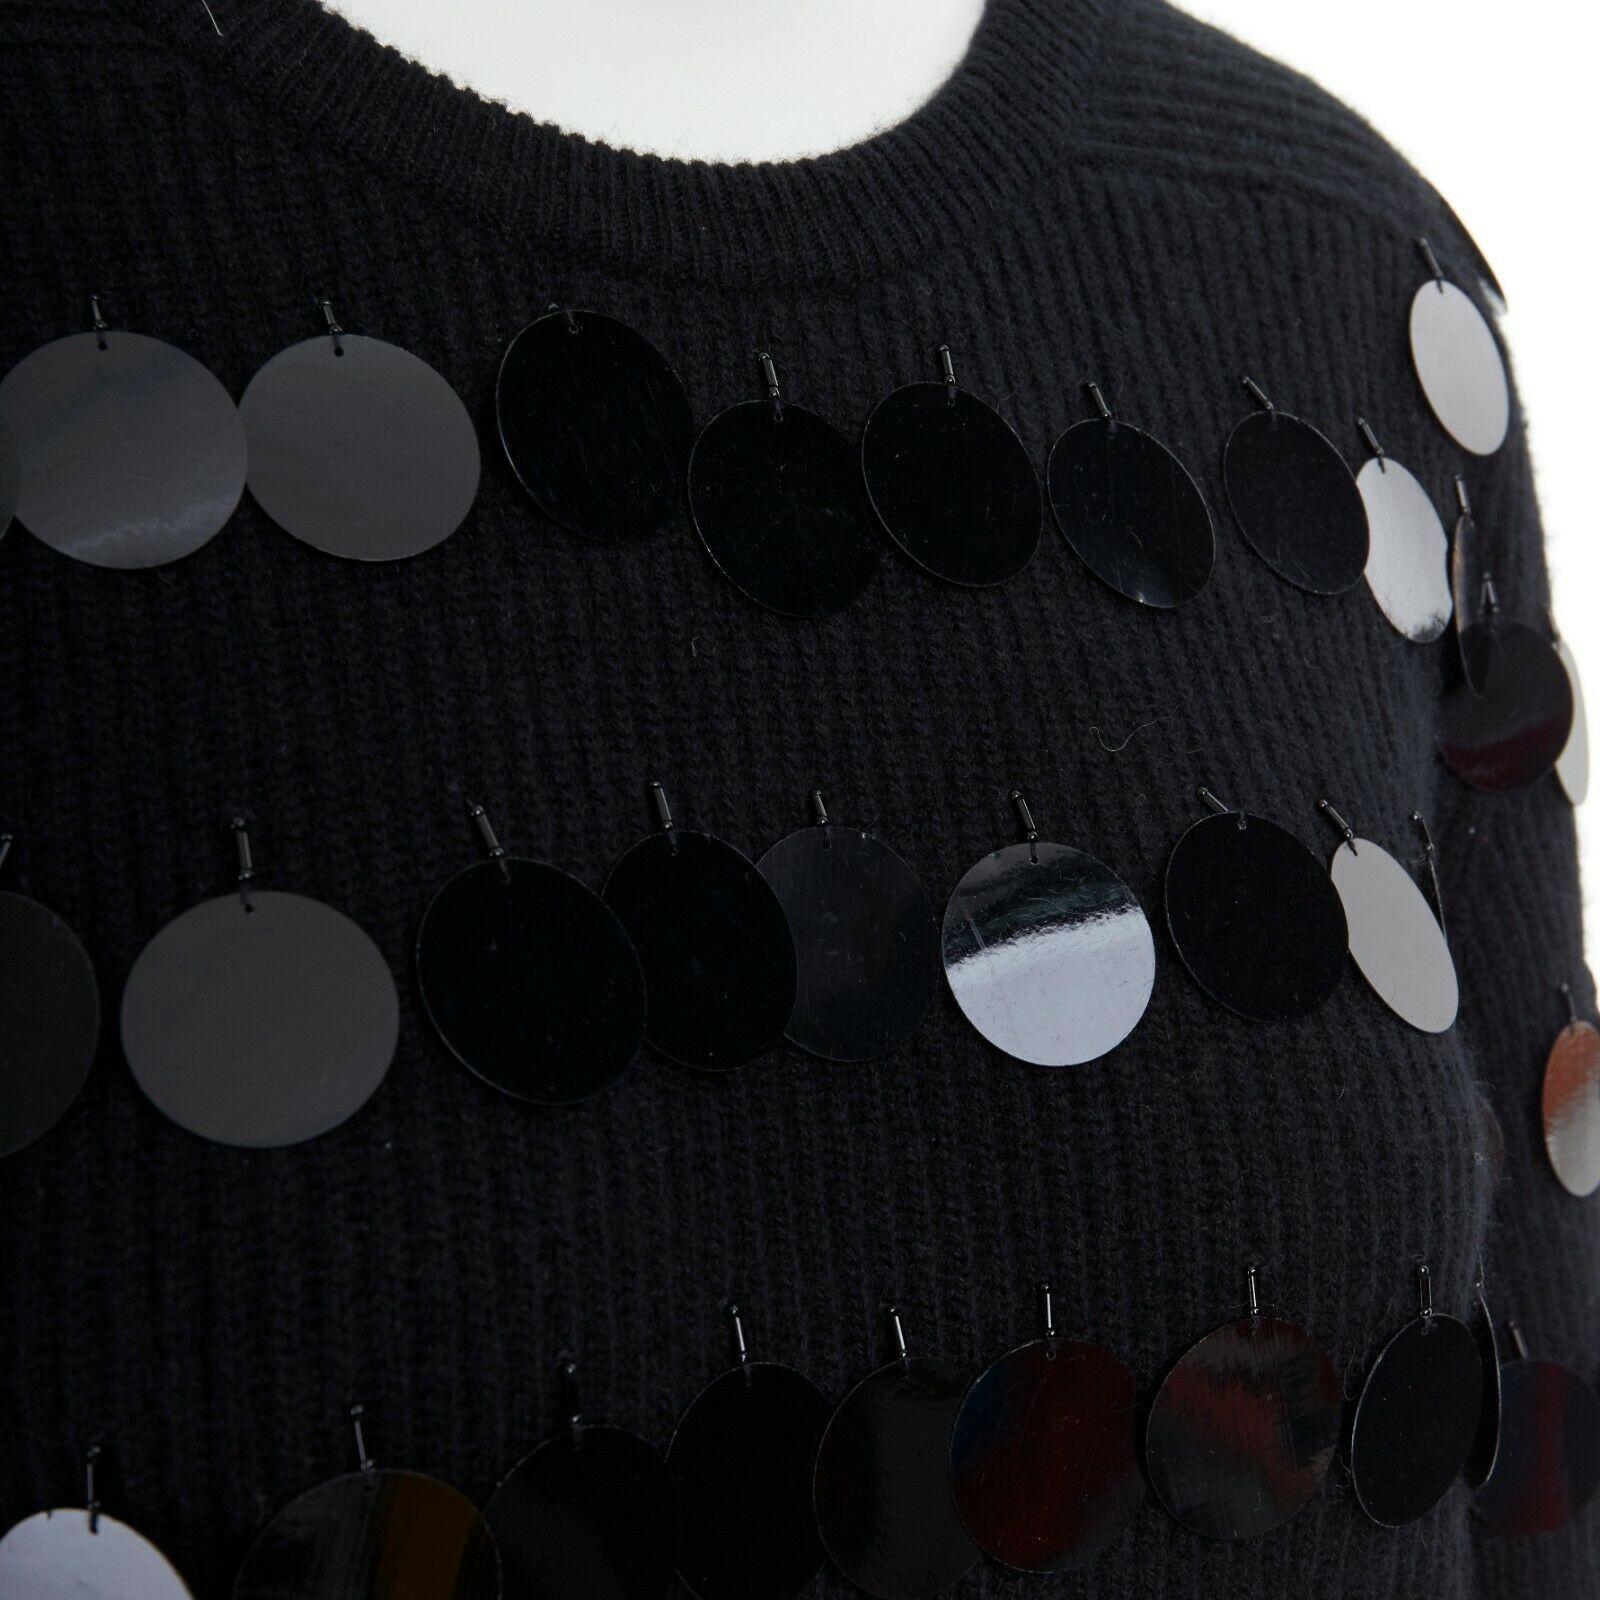 CHRISTOPHER KANE 100% cashmere black bead pailette side slit knit sweater top S
CHRISTOPHER KANE
FROM THE FALL WINTER 2008 RUNWAY
100% cashmere. Round ribbed neck. 
Large pailette embellishment throughout. 
Long sleeves. Dual slit side. 
Made in